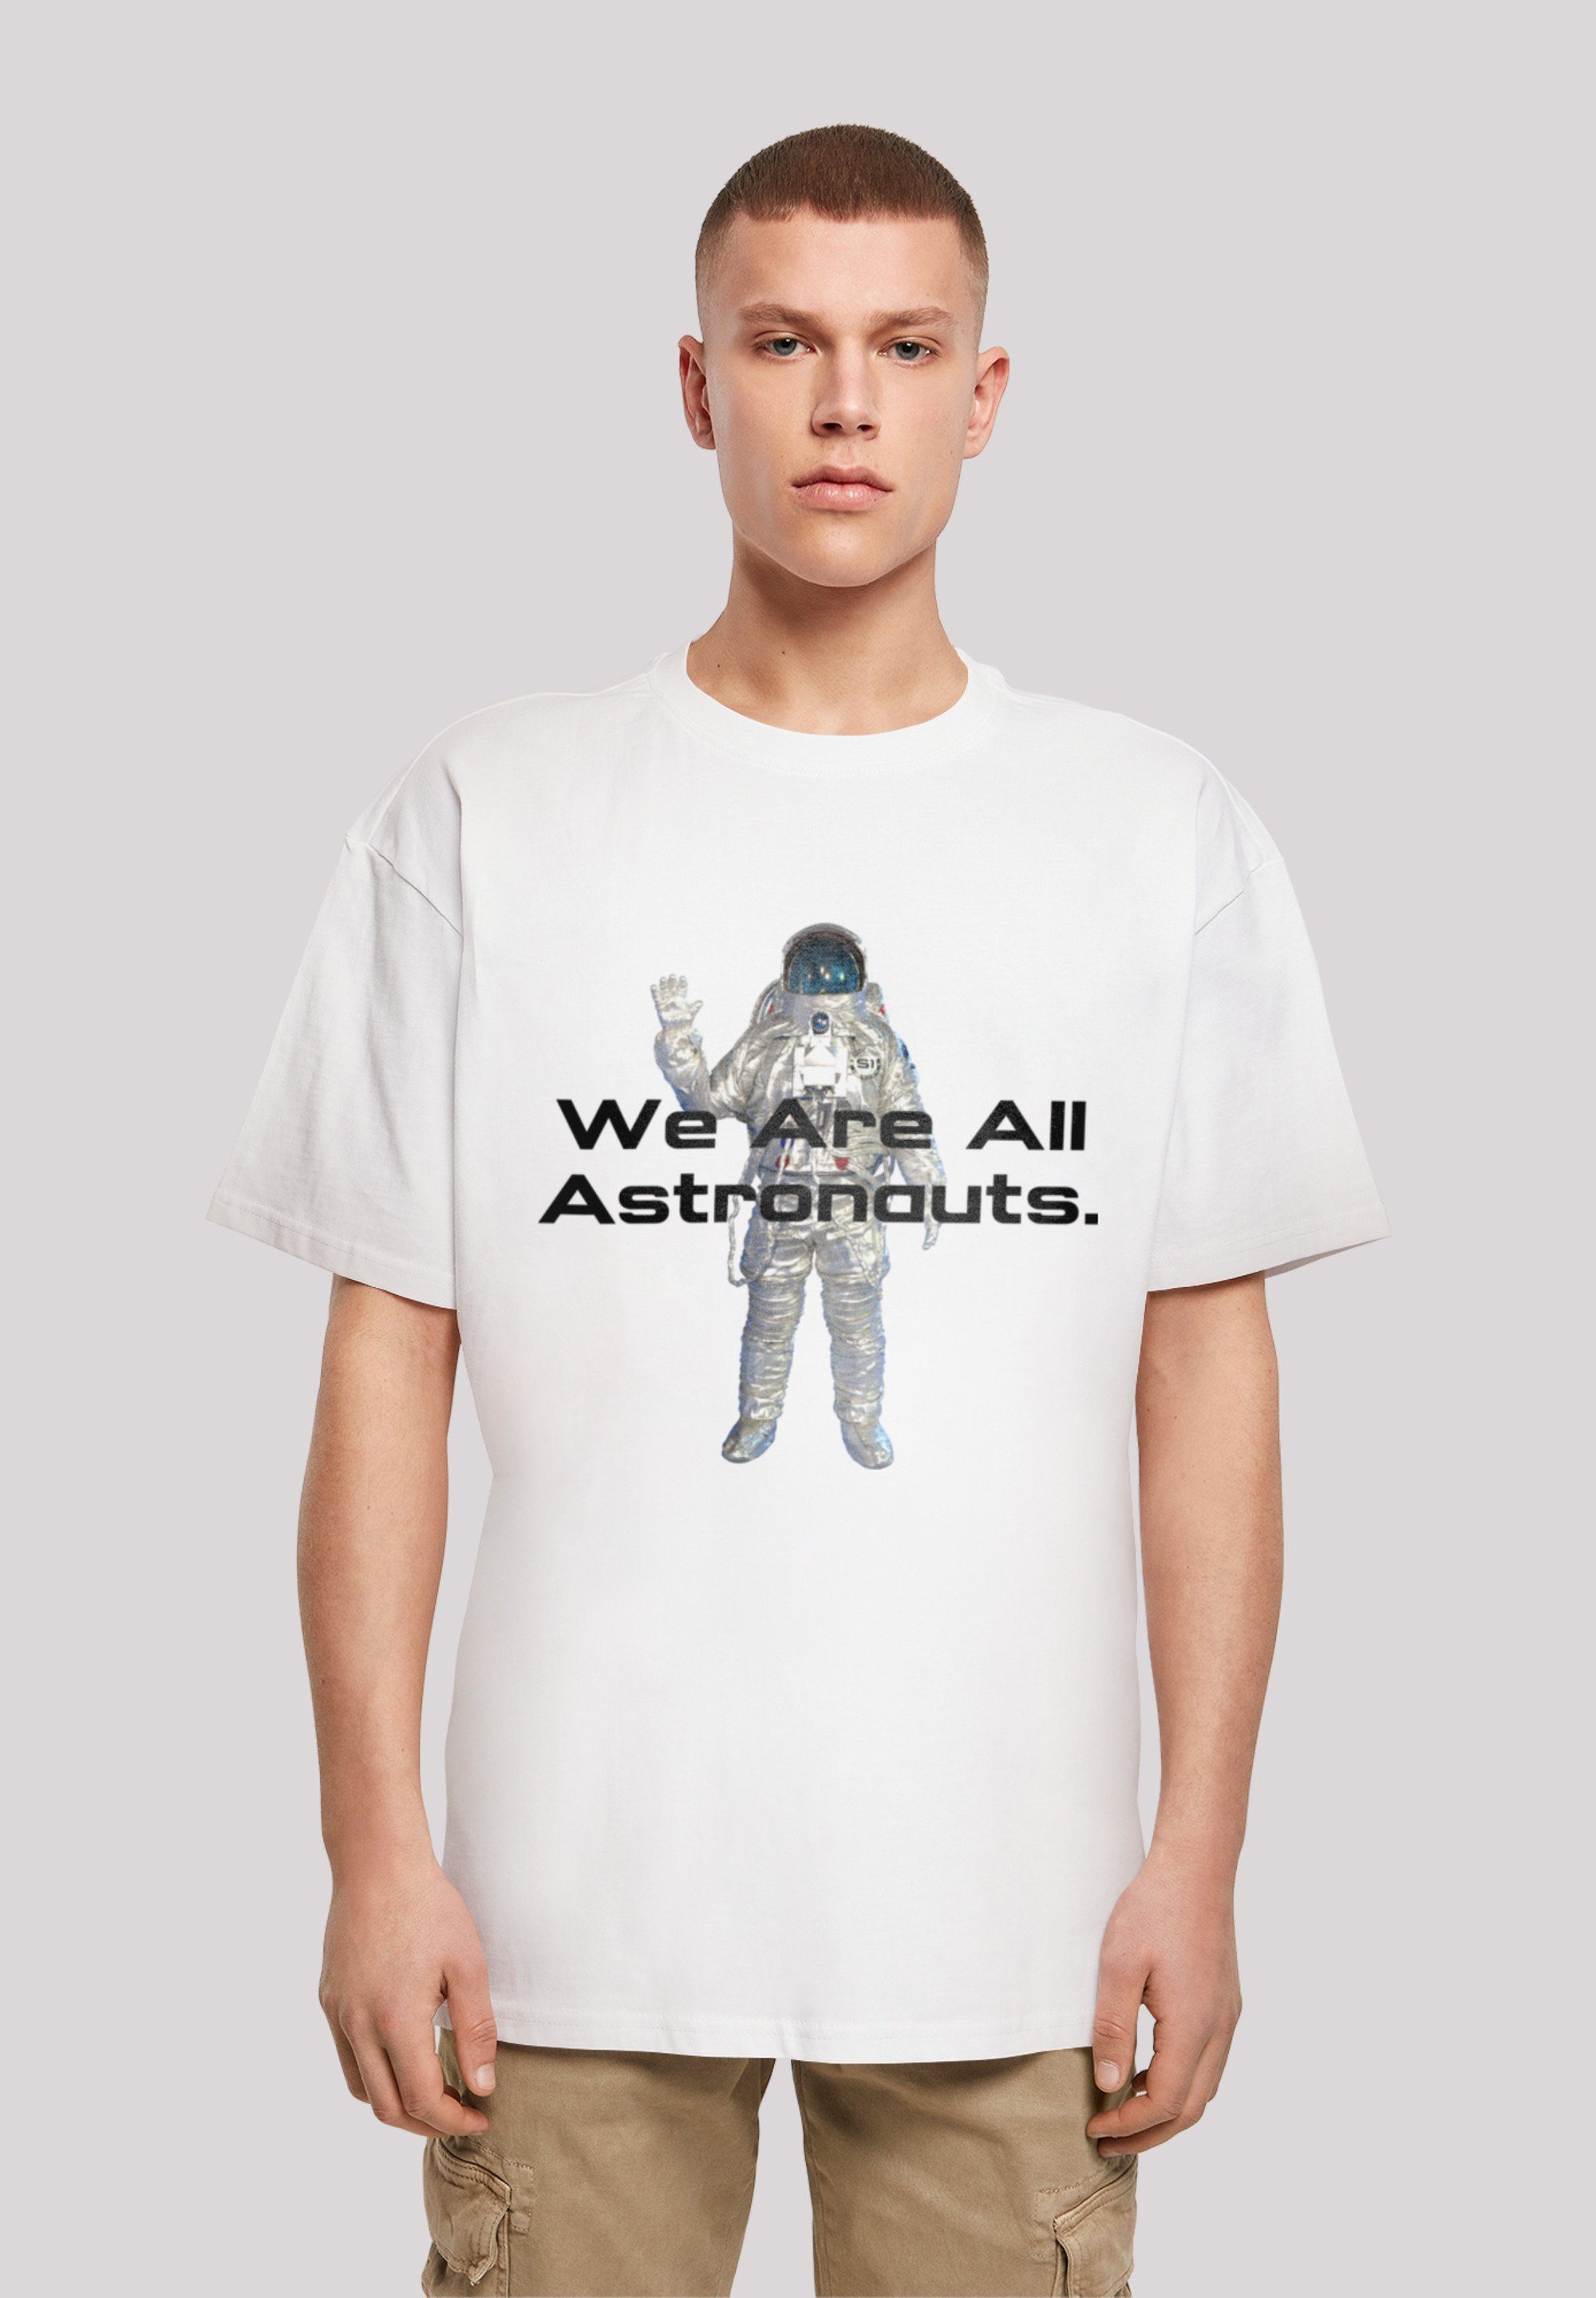 weiß astronauts SpaceOne F4NT4STIC We T-Shirt PHIBER Print are all